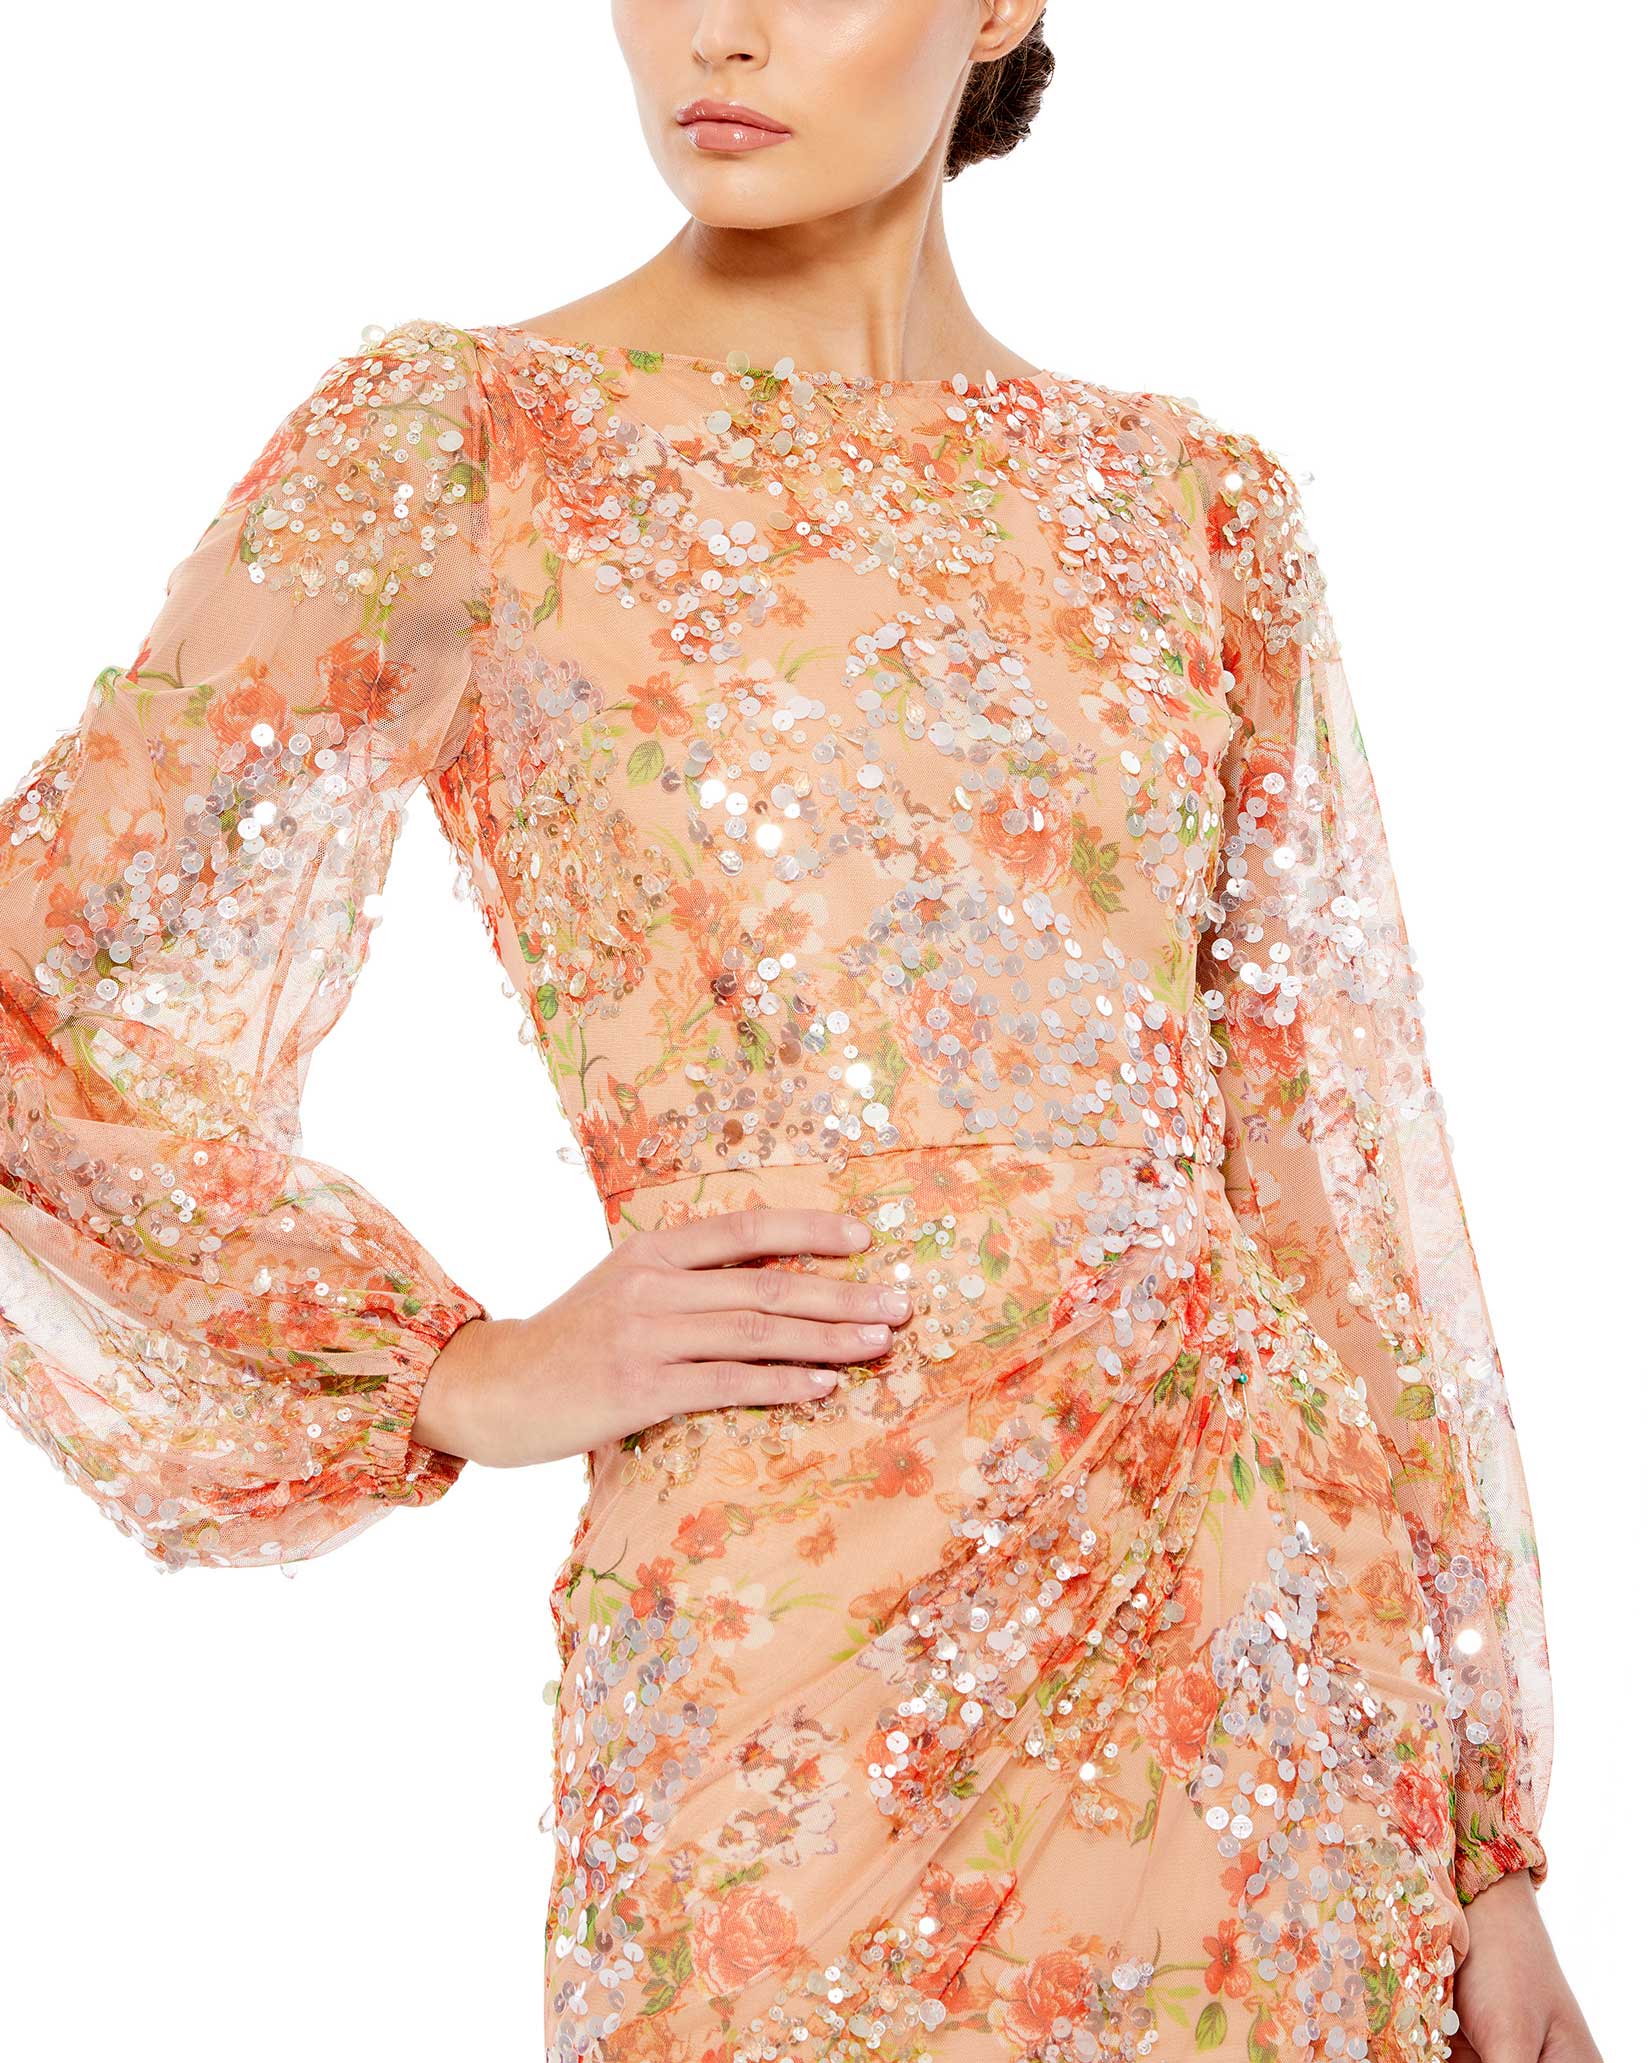 Floral Print Sequined Puff Sleeve Gown